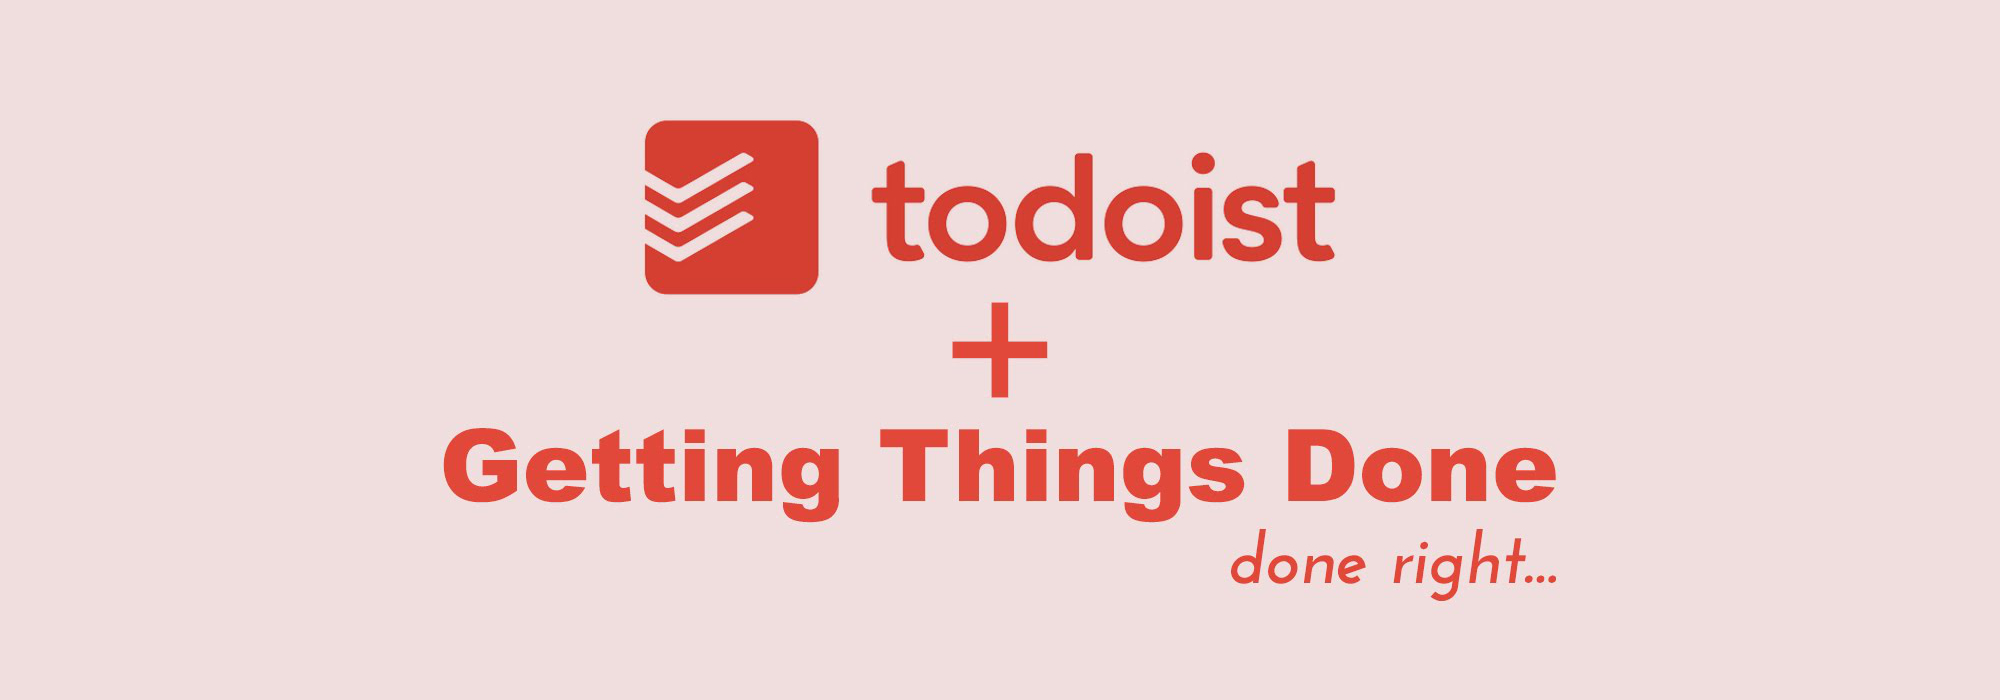 Organisation tools as a PhD student: GTD with Todoist